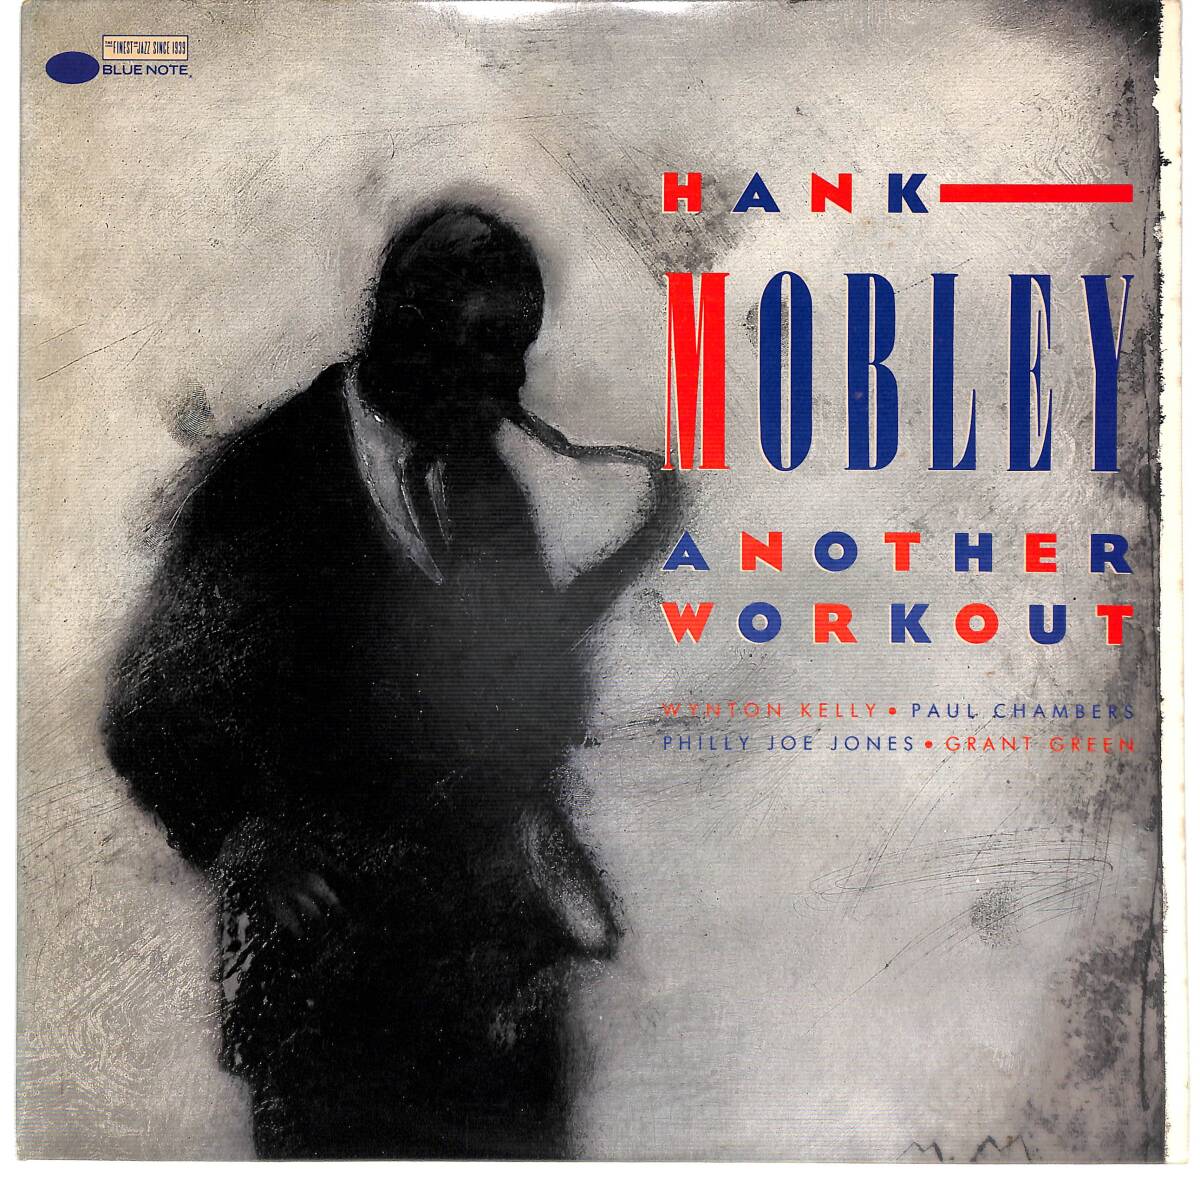 e3364/LP/米/BLUE NOTE/85年盤/SRC刻印/Hank Mobley/Another Workoutの画像1